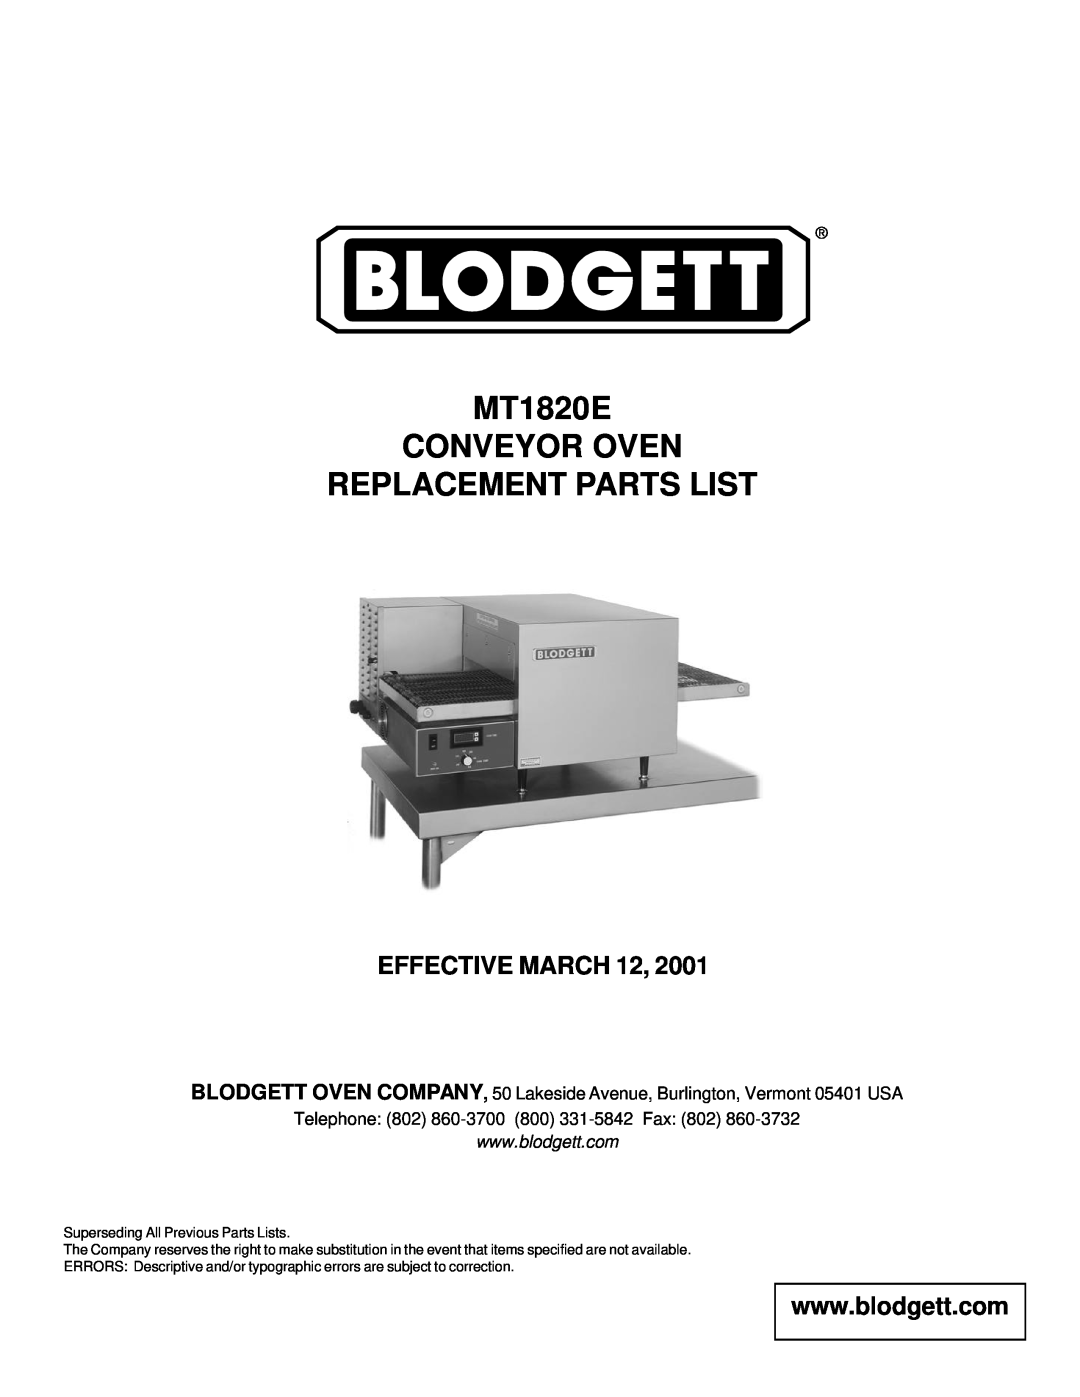 Blodgett manual Effective March, MT1820E CONVEYOR OVEN REPLACEMENT PARTS LIST, Superseding All Previous Parts Lists 